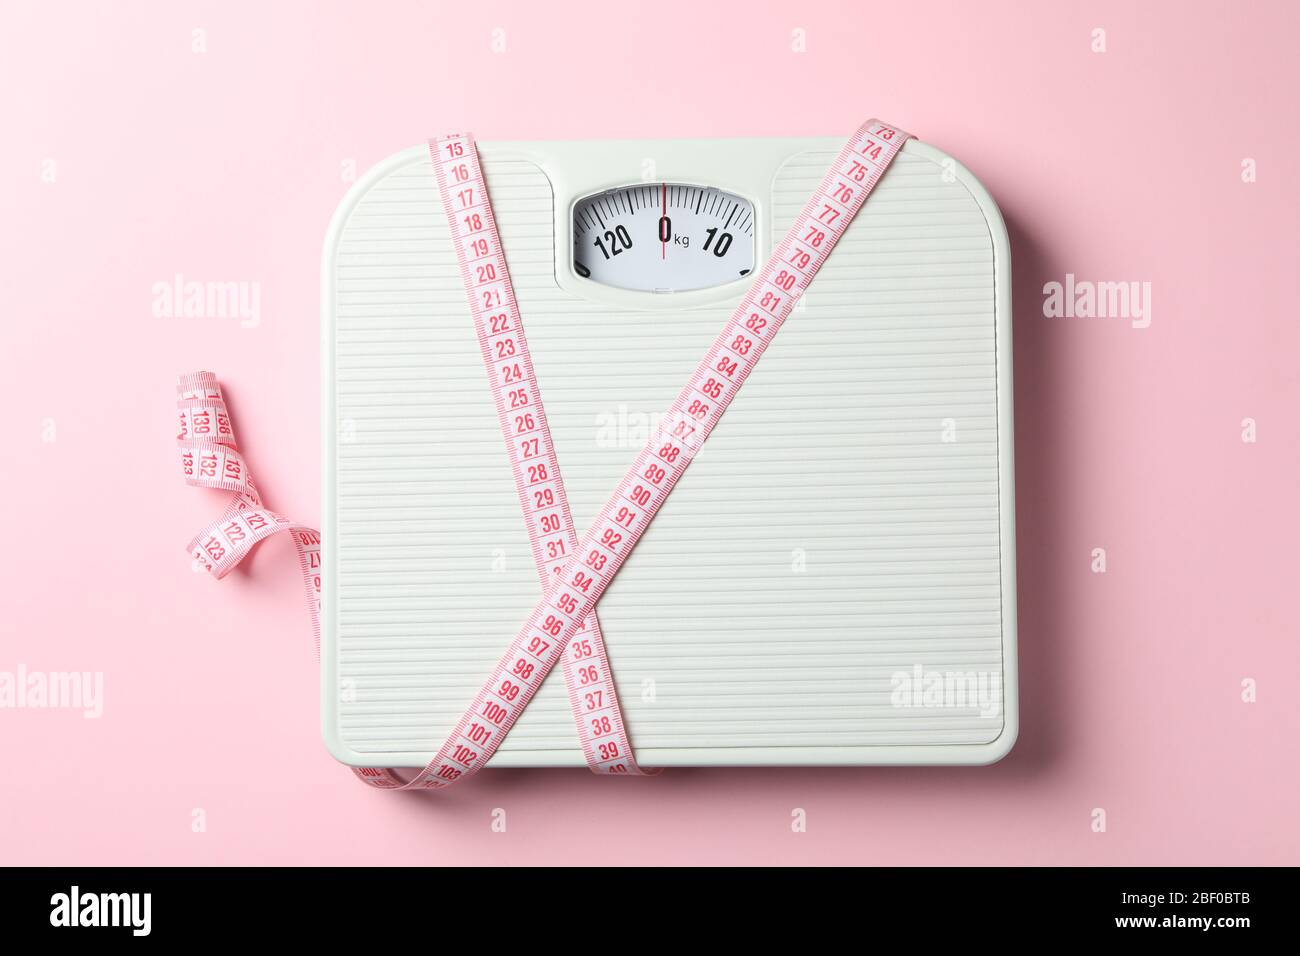 https://c8.alamy.com/comp/2BF0BTB/scales-and-measuring-tape-on-pink-background-weight-loss-concept-2BF0BTB.jpg